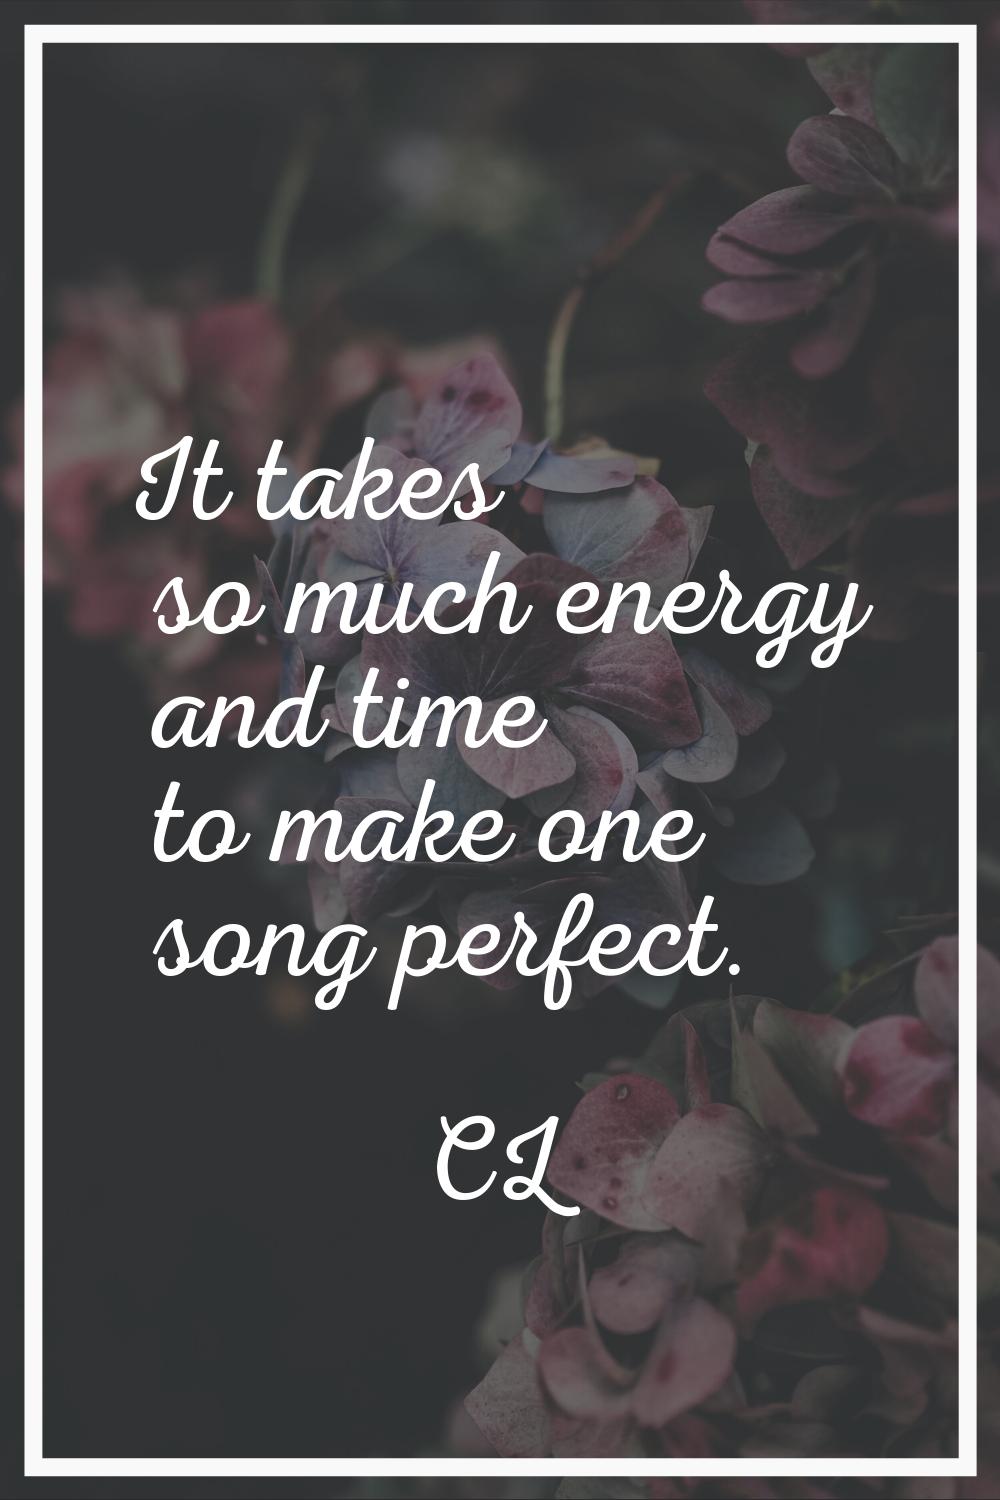 It takes so much energy and time to make one song perfect.